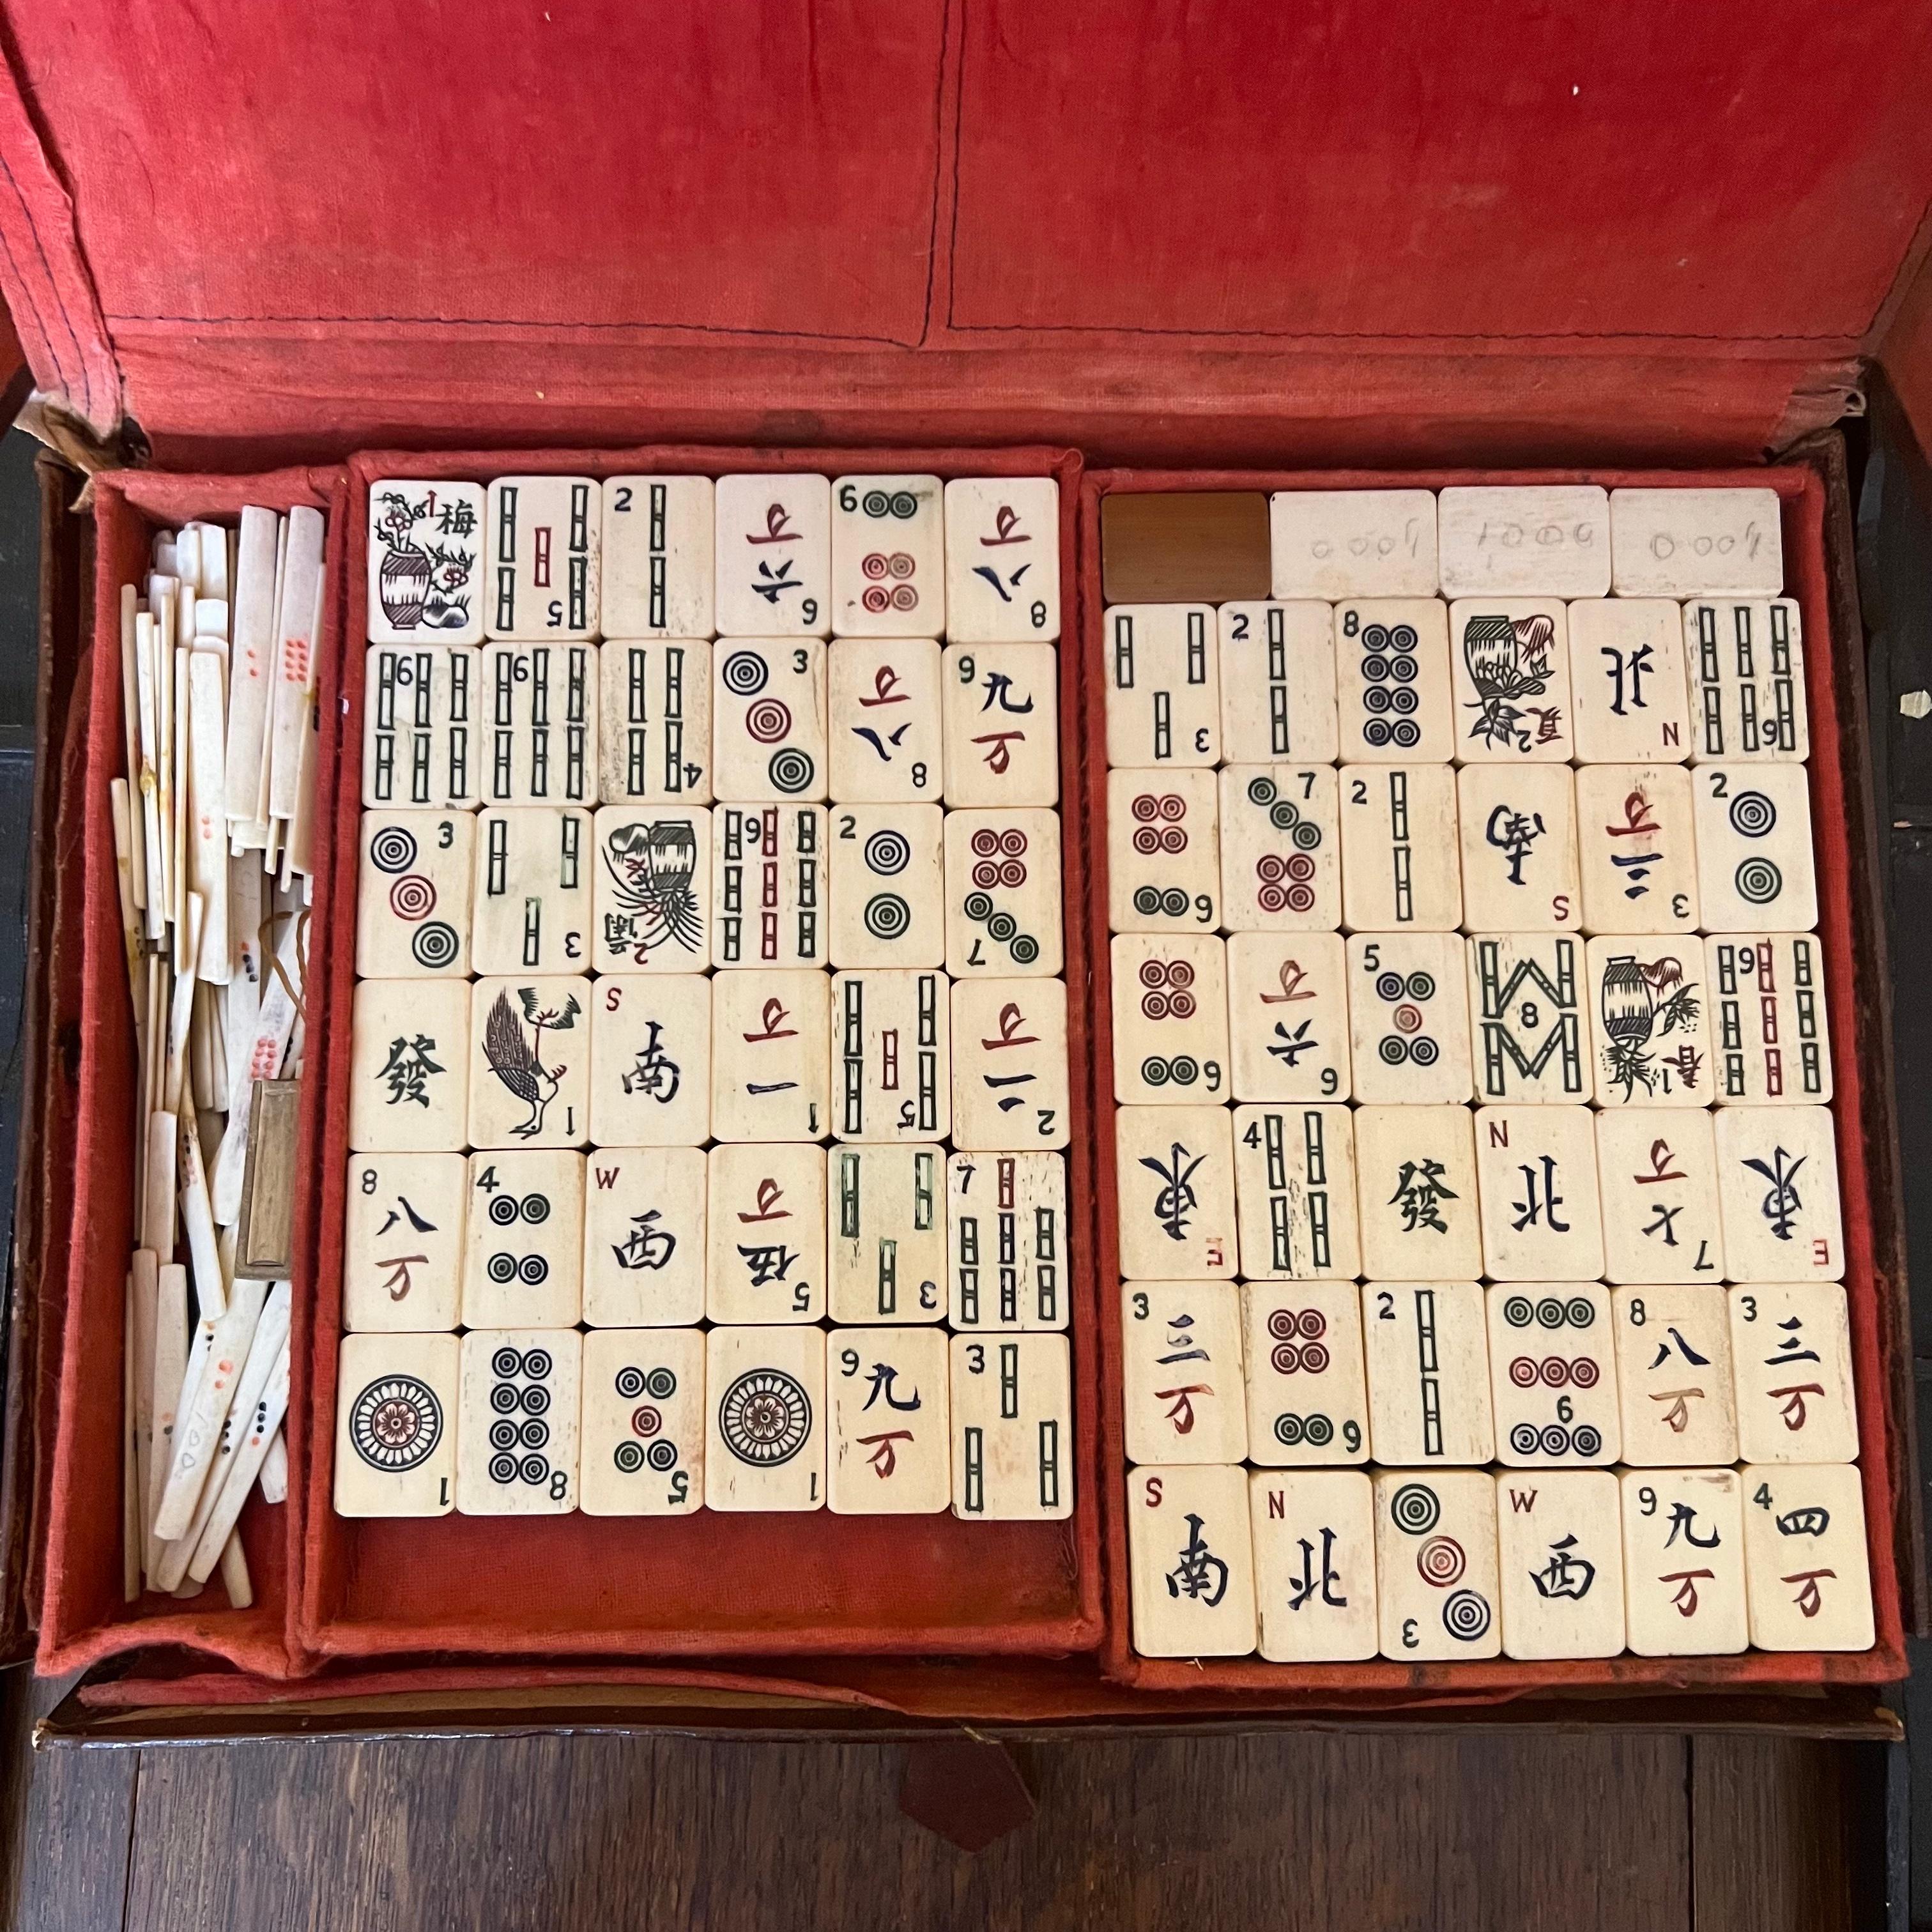 Tiles are bone and counters with bamboo base, leather case, black wooden stands set of 4, there is ware to case and stands from use and age

Circa: Early 20th Century

Material: Bone, Leather & Wood

Country Of Origin: China

Measurements: 4.5cm